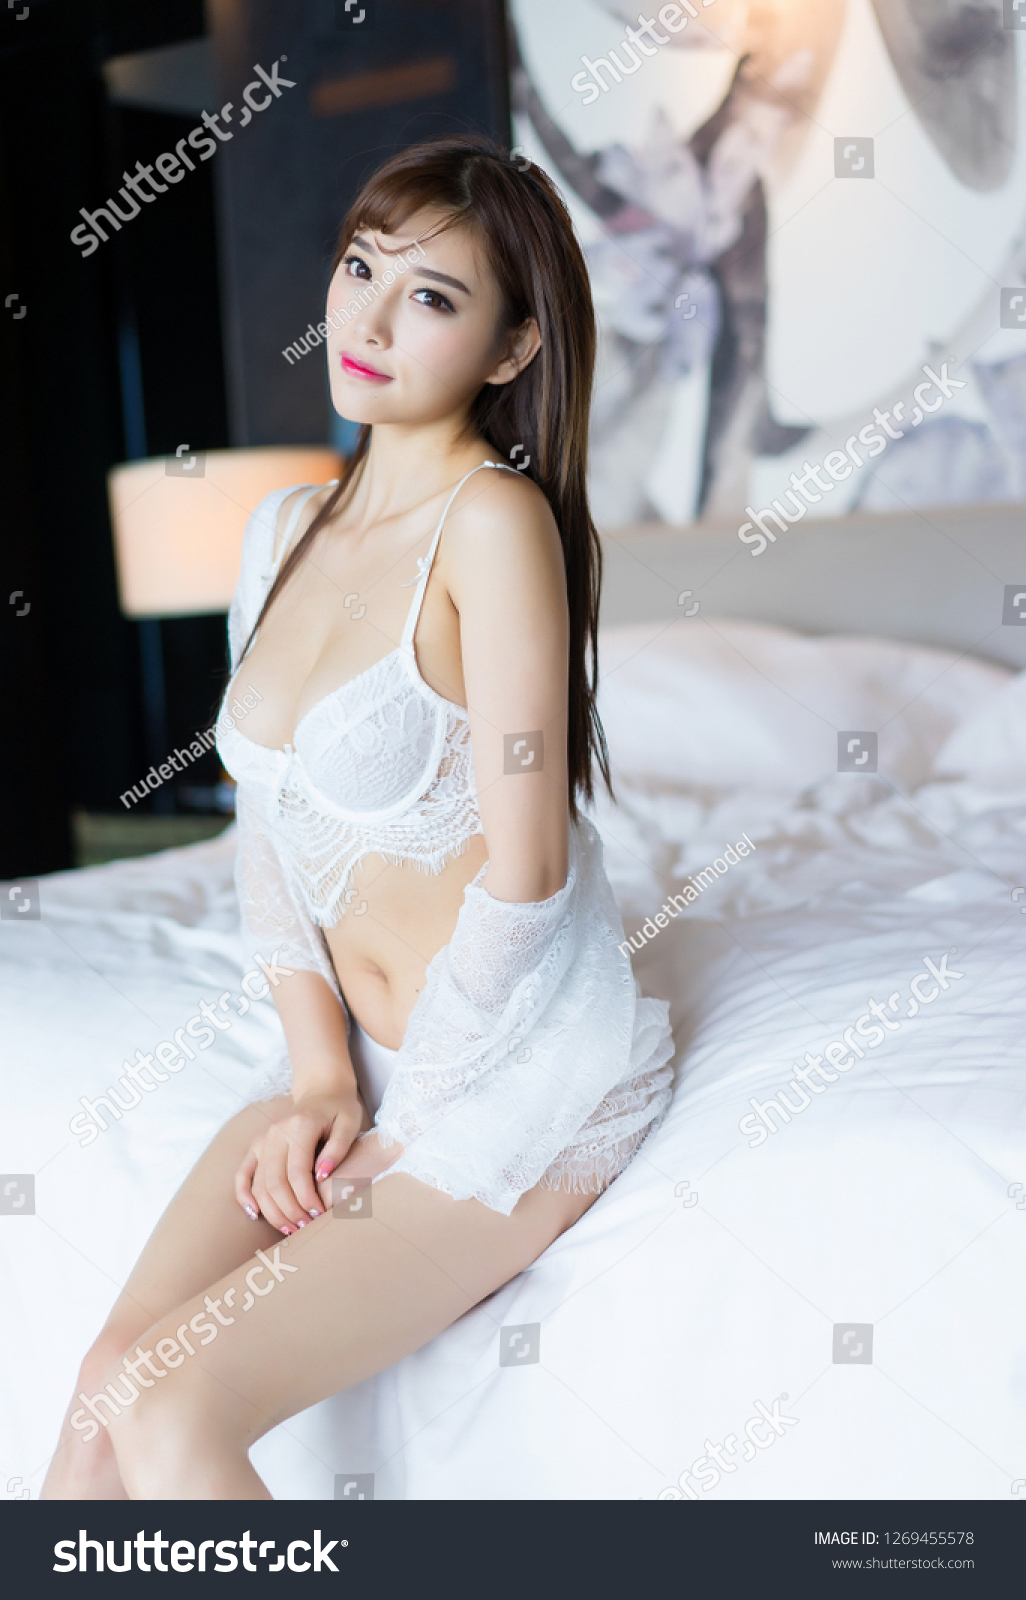 Huy Girls In Sexy Lingerie